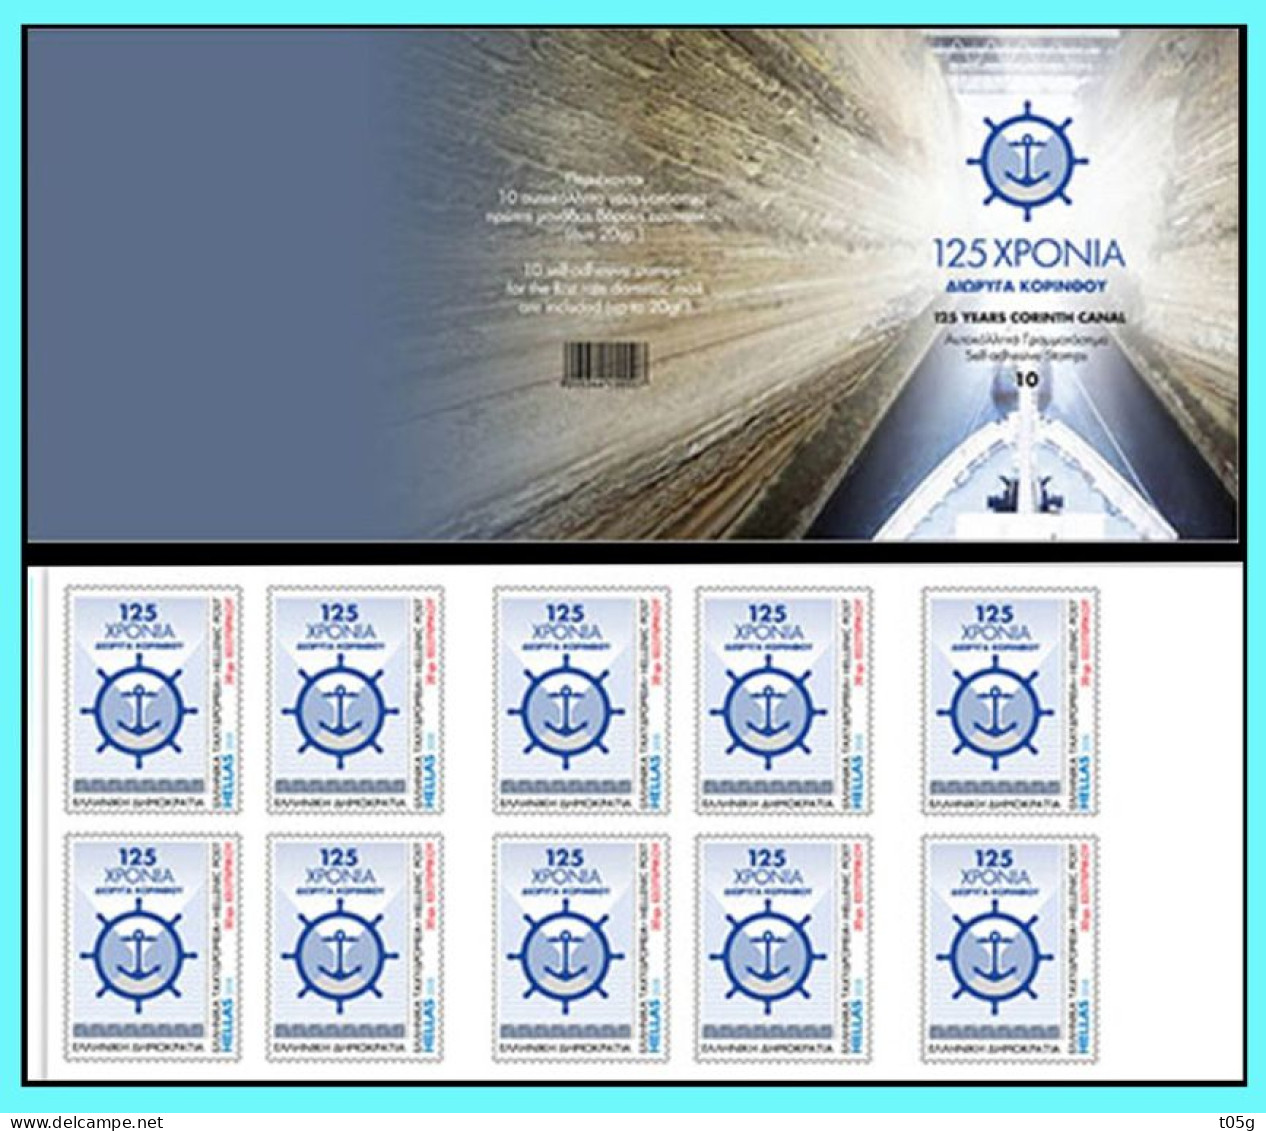 GREECE- GRECE  - HELLAS 2018: 125 YEARS OF THE KORINTH CANAL​ Self-athesive Stamp Compl. Booklet  MNH** - Nuovi